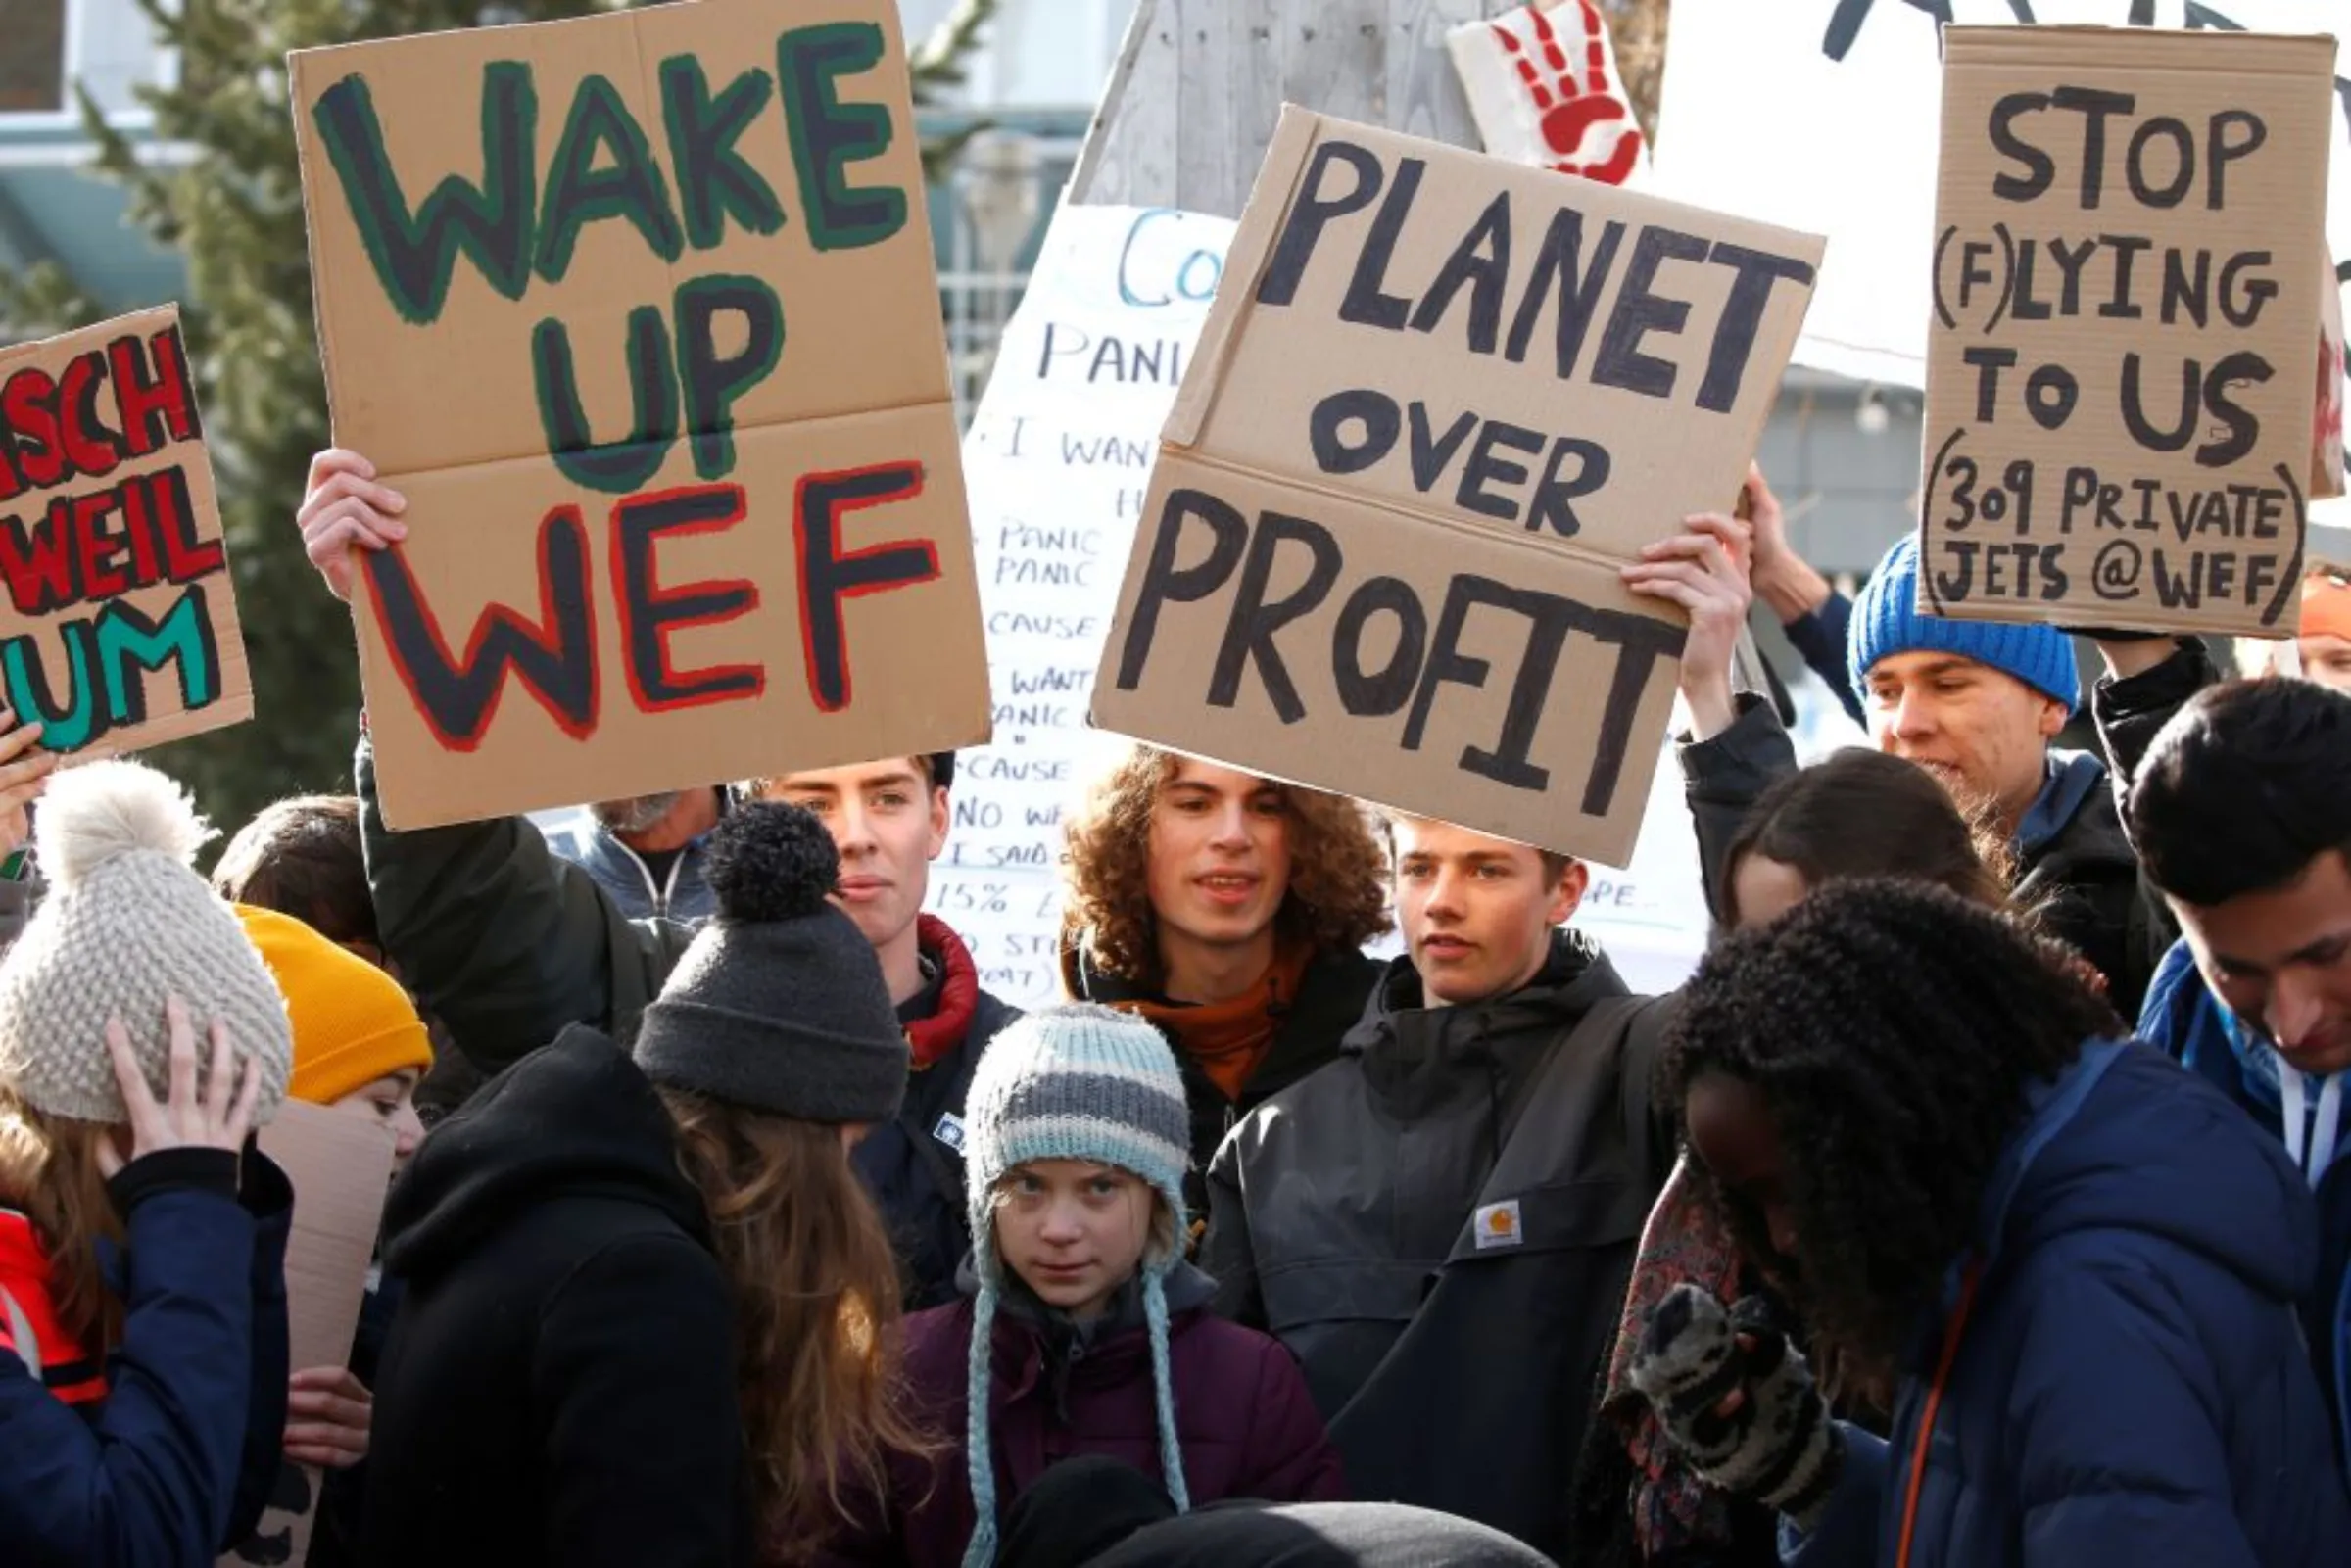 Swedish climate change activist Greta Thunberg takes part in a climate strike protest during the 50th World Economic Forum (WEF) annual meeting in Davos, Switzerland, January 24, 2020